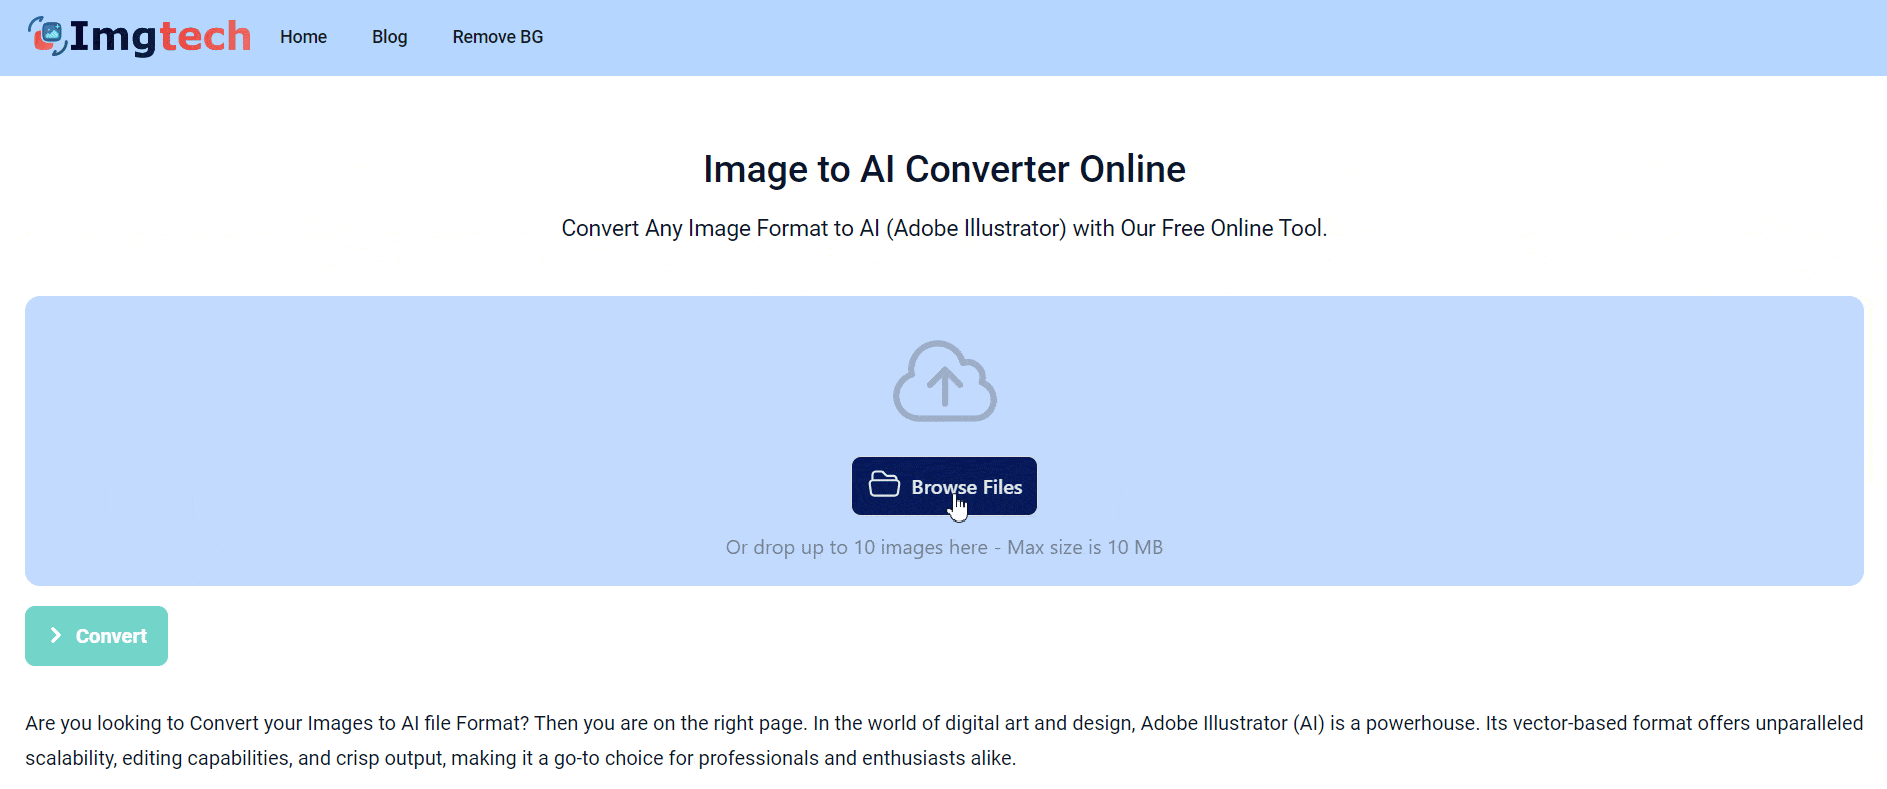 images to ai converter online step by step process